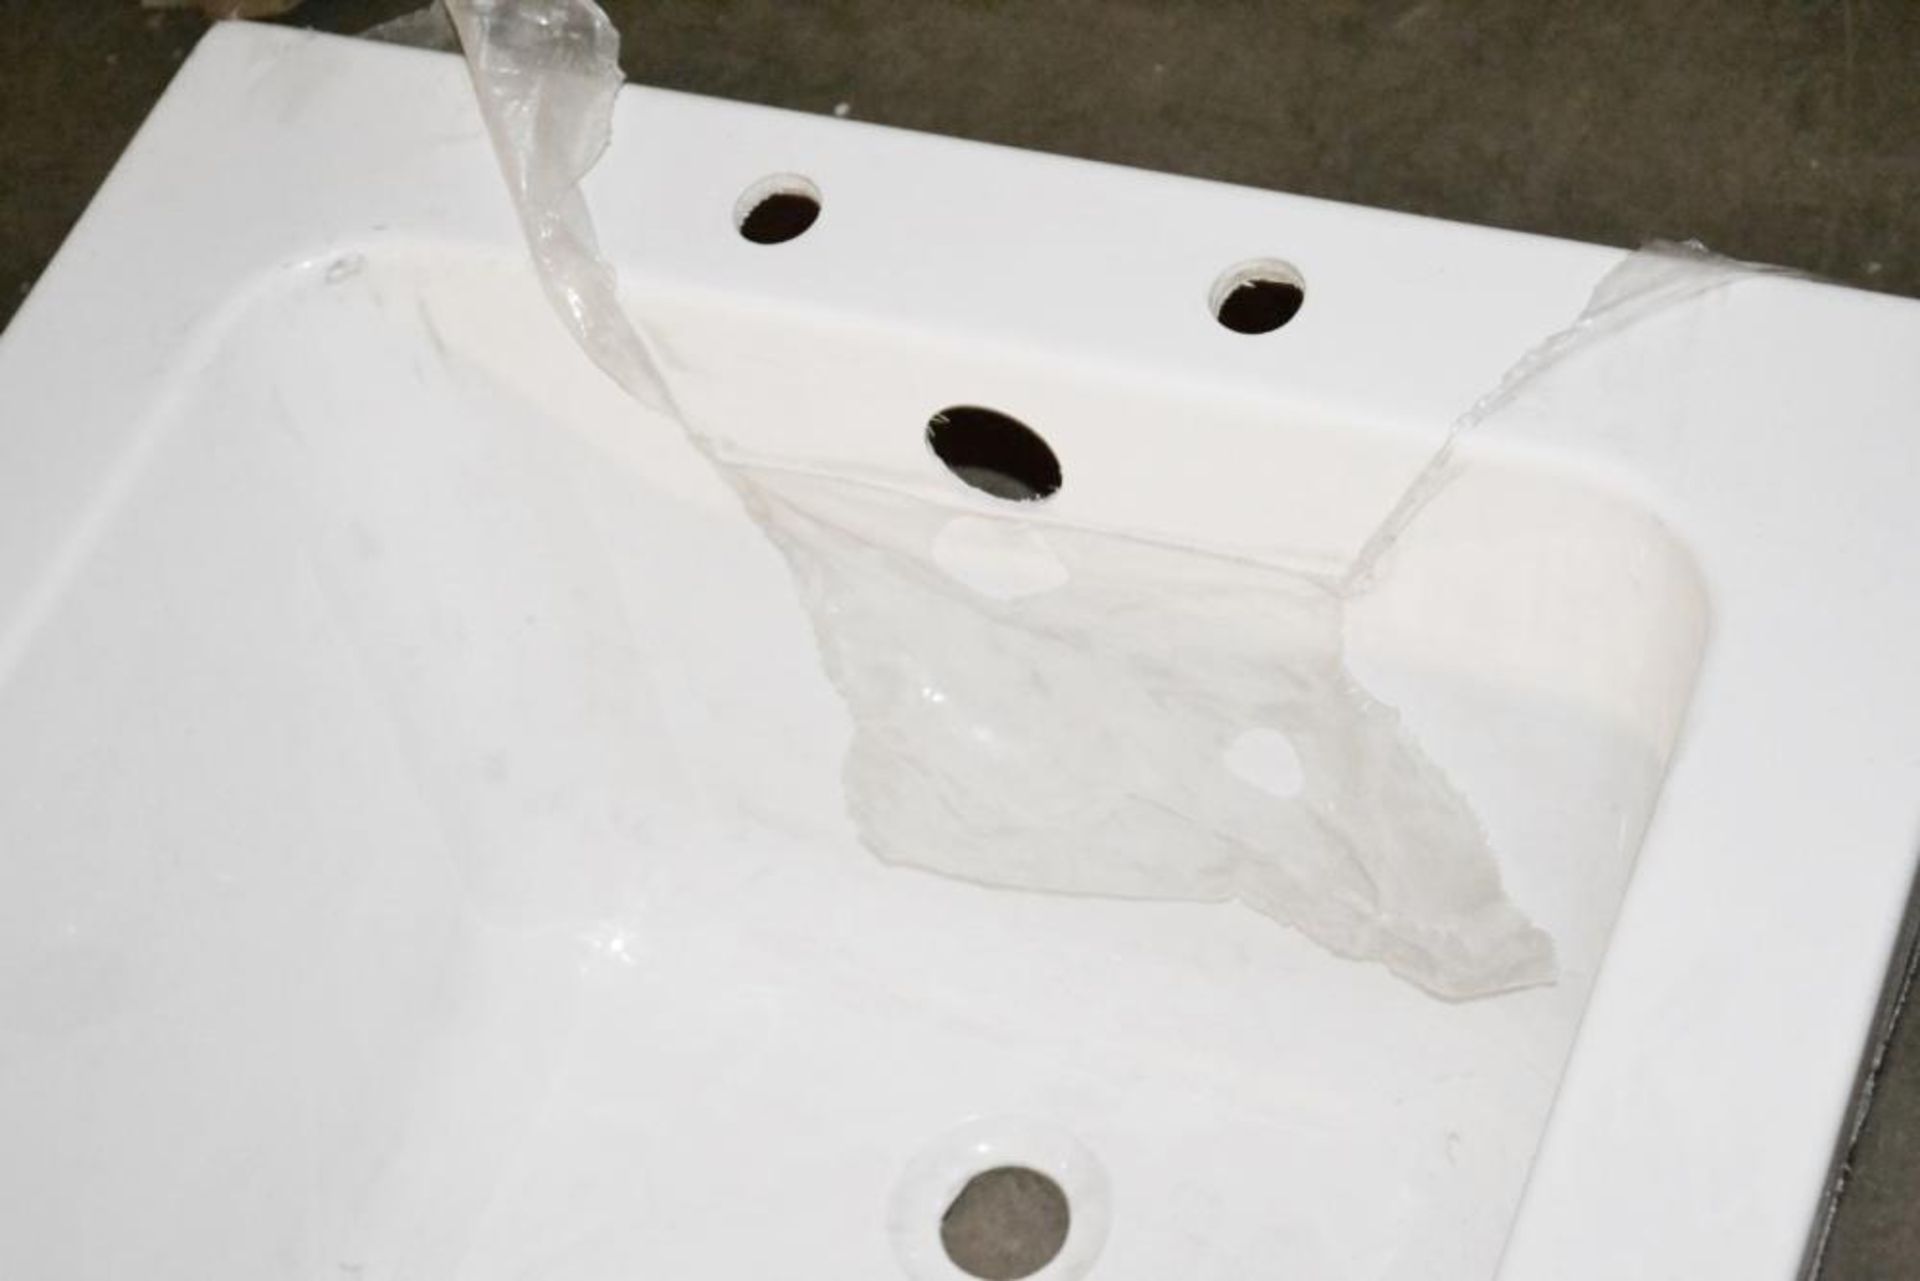 1 x 1700 x 700 Acrylic Straight 2-Tap Hole Bath - New / Unused Stock - CL269 - Ref LH286 - Location: - Image 3 of 4